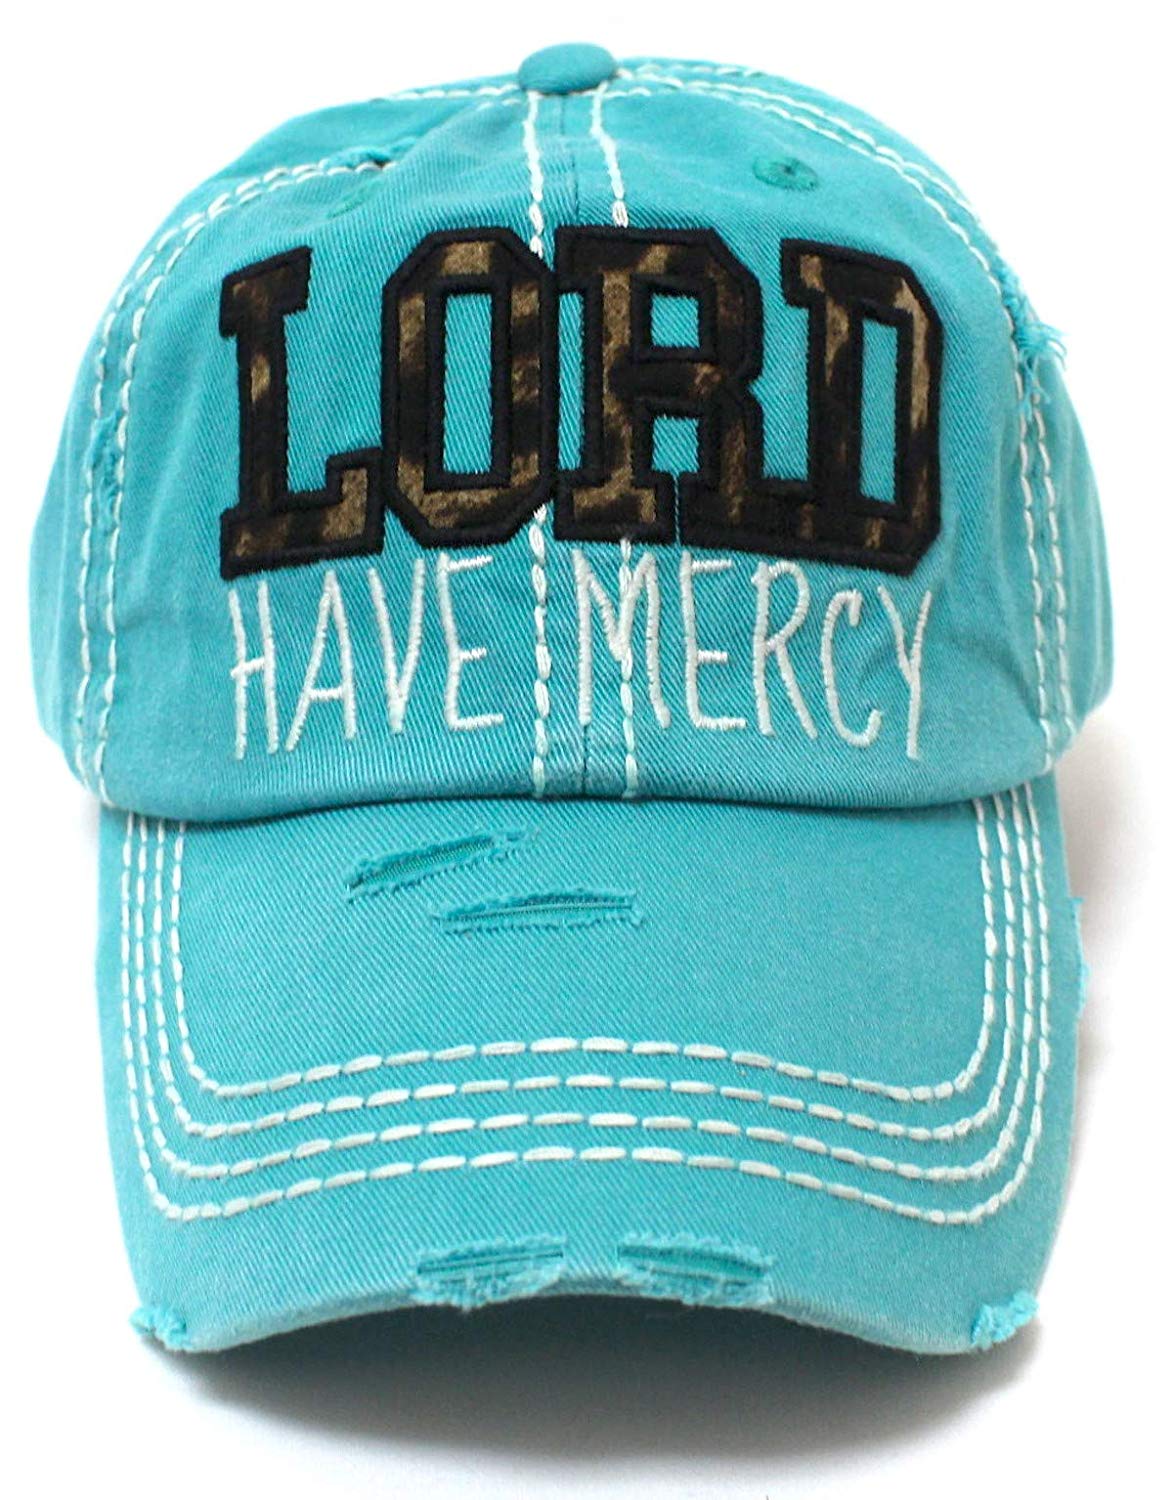 CAPS 'N VINTAGE Women's Hat Lord Have Mercy Leopard Embroidery Cap, Turquoise - Caps 'N Vintage 